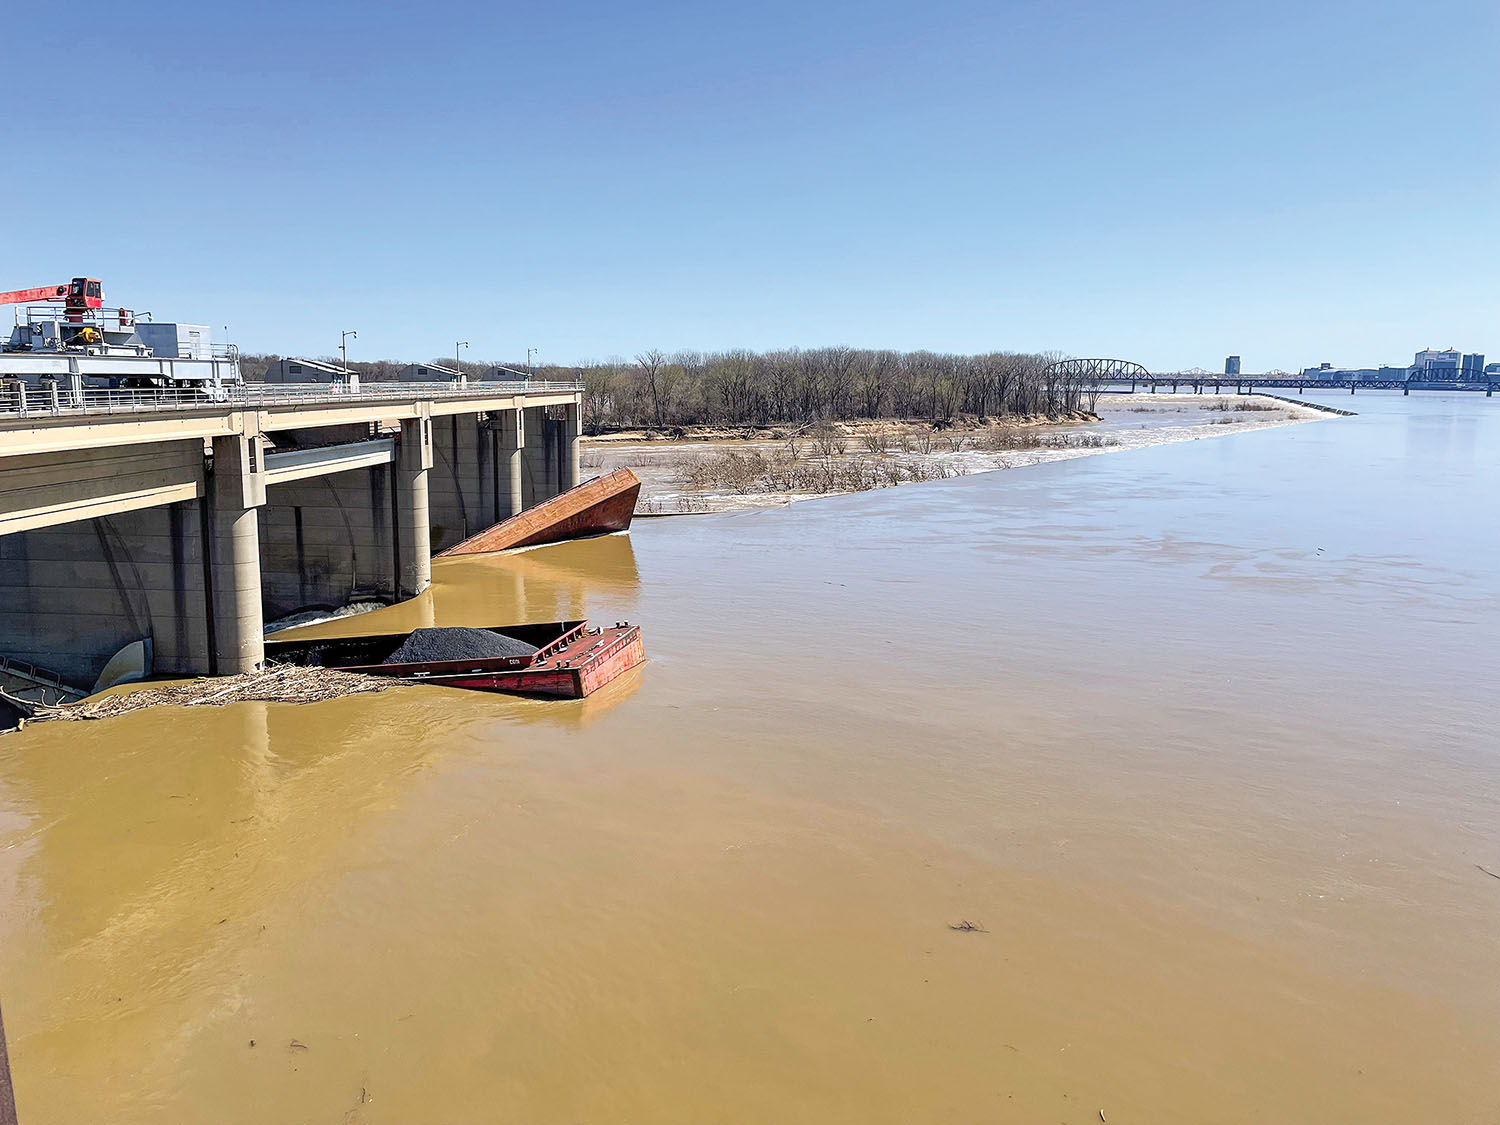 Two barges were initially in the gate bays at McAlpine Locks and Dam, Ohio Mile 606.8, following a 10-barge breakaway, as seen in this March 11 photo. One of those flushed through the gate the next day and sank about 400 feet below the site. (Photo courtesy of Louisville Engineer District)